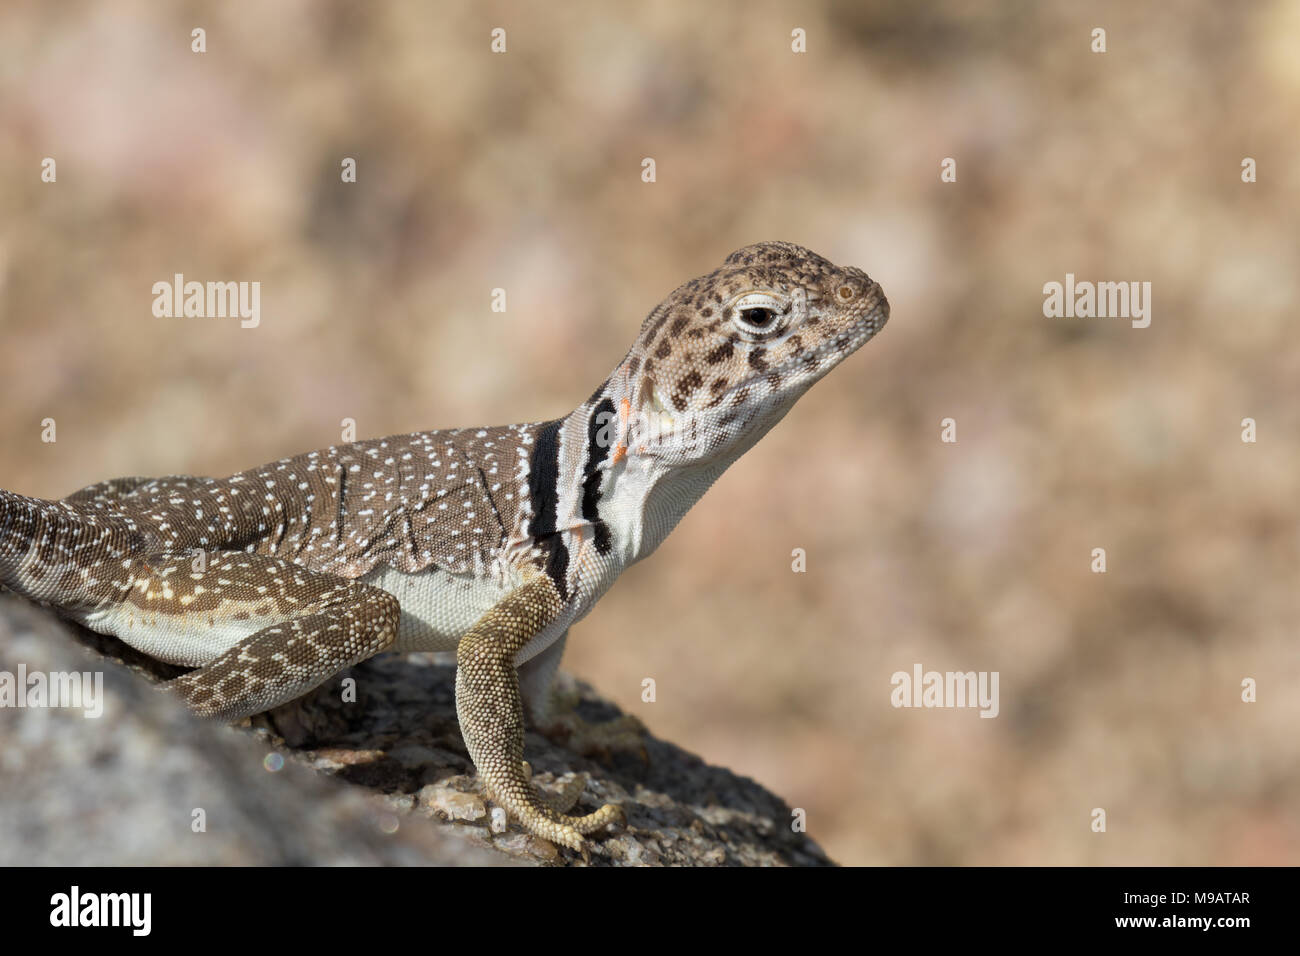 Close-up of an eastern collared lizard in New Mexico, USA Stock Photo